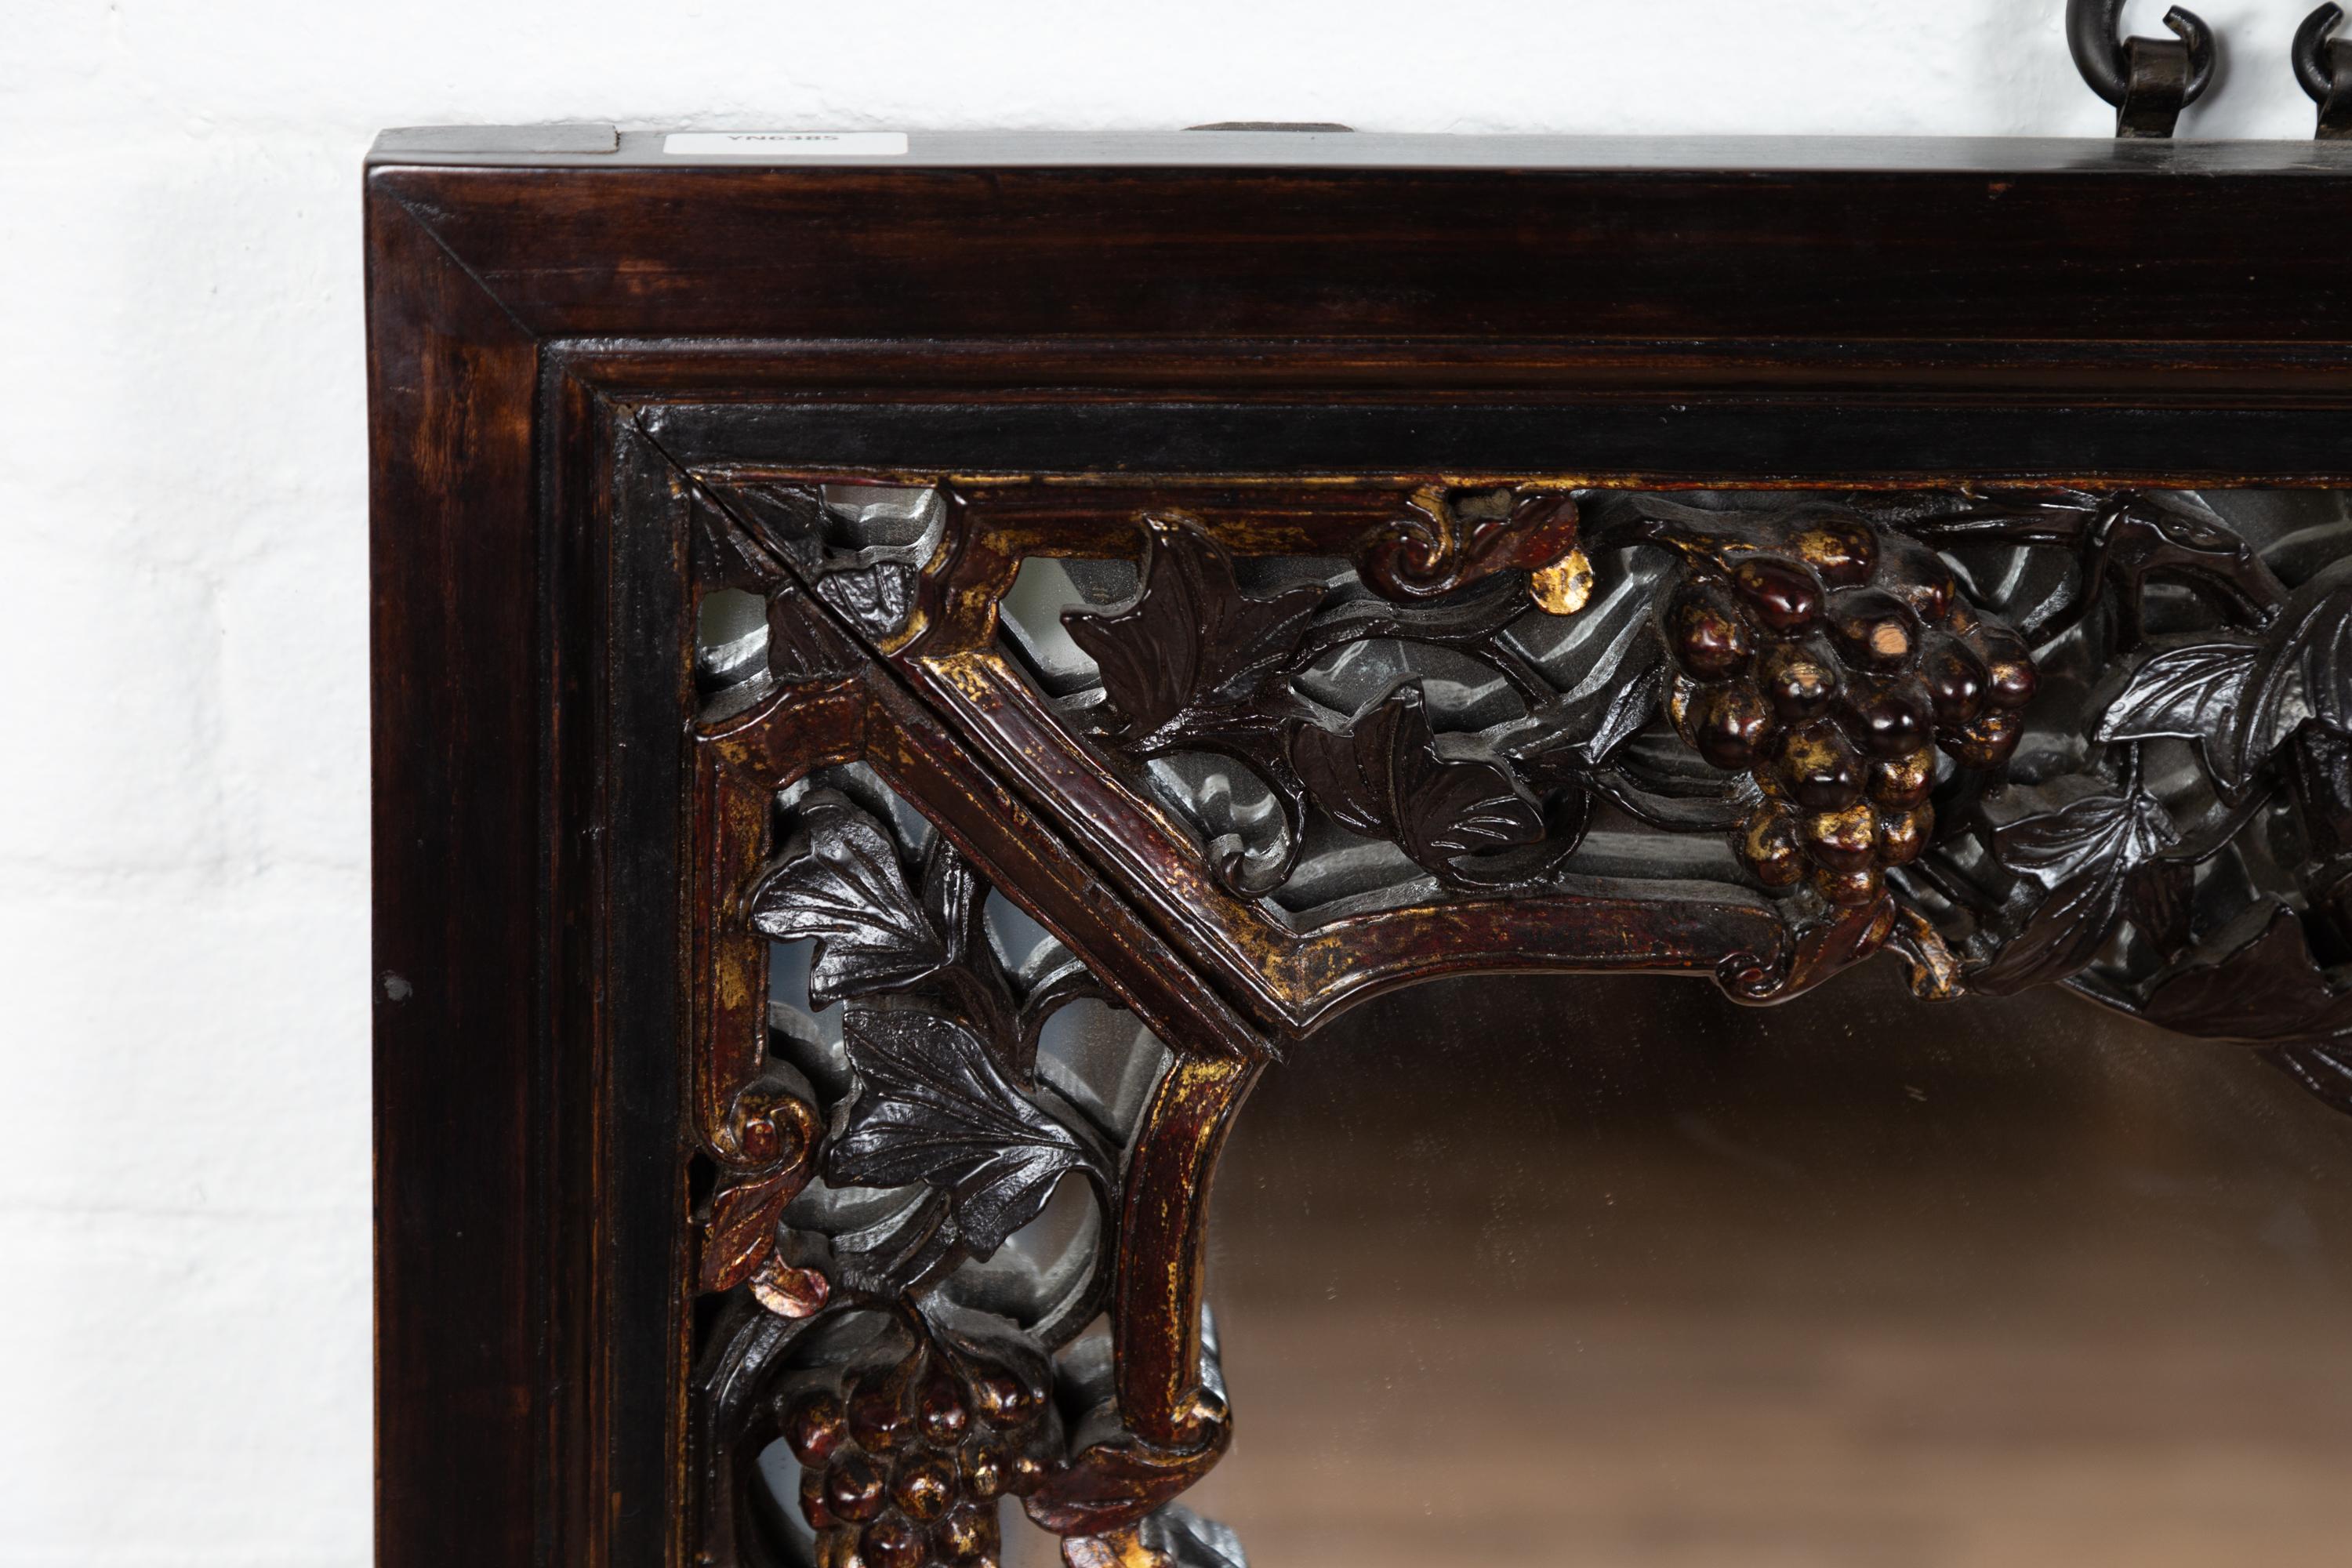 A large Chinese vintage hand carved mirror from the mid-20th century, with flowers and fruits of the earth. Born in China during the midcentury period, this elegant wall mirror charms our eyes with its dark patina accented with discreet gilt